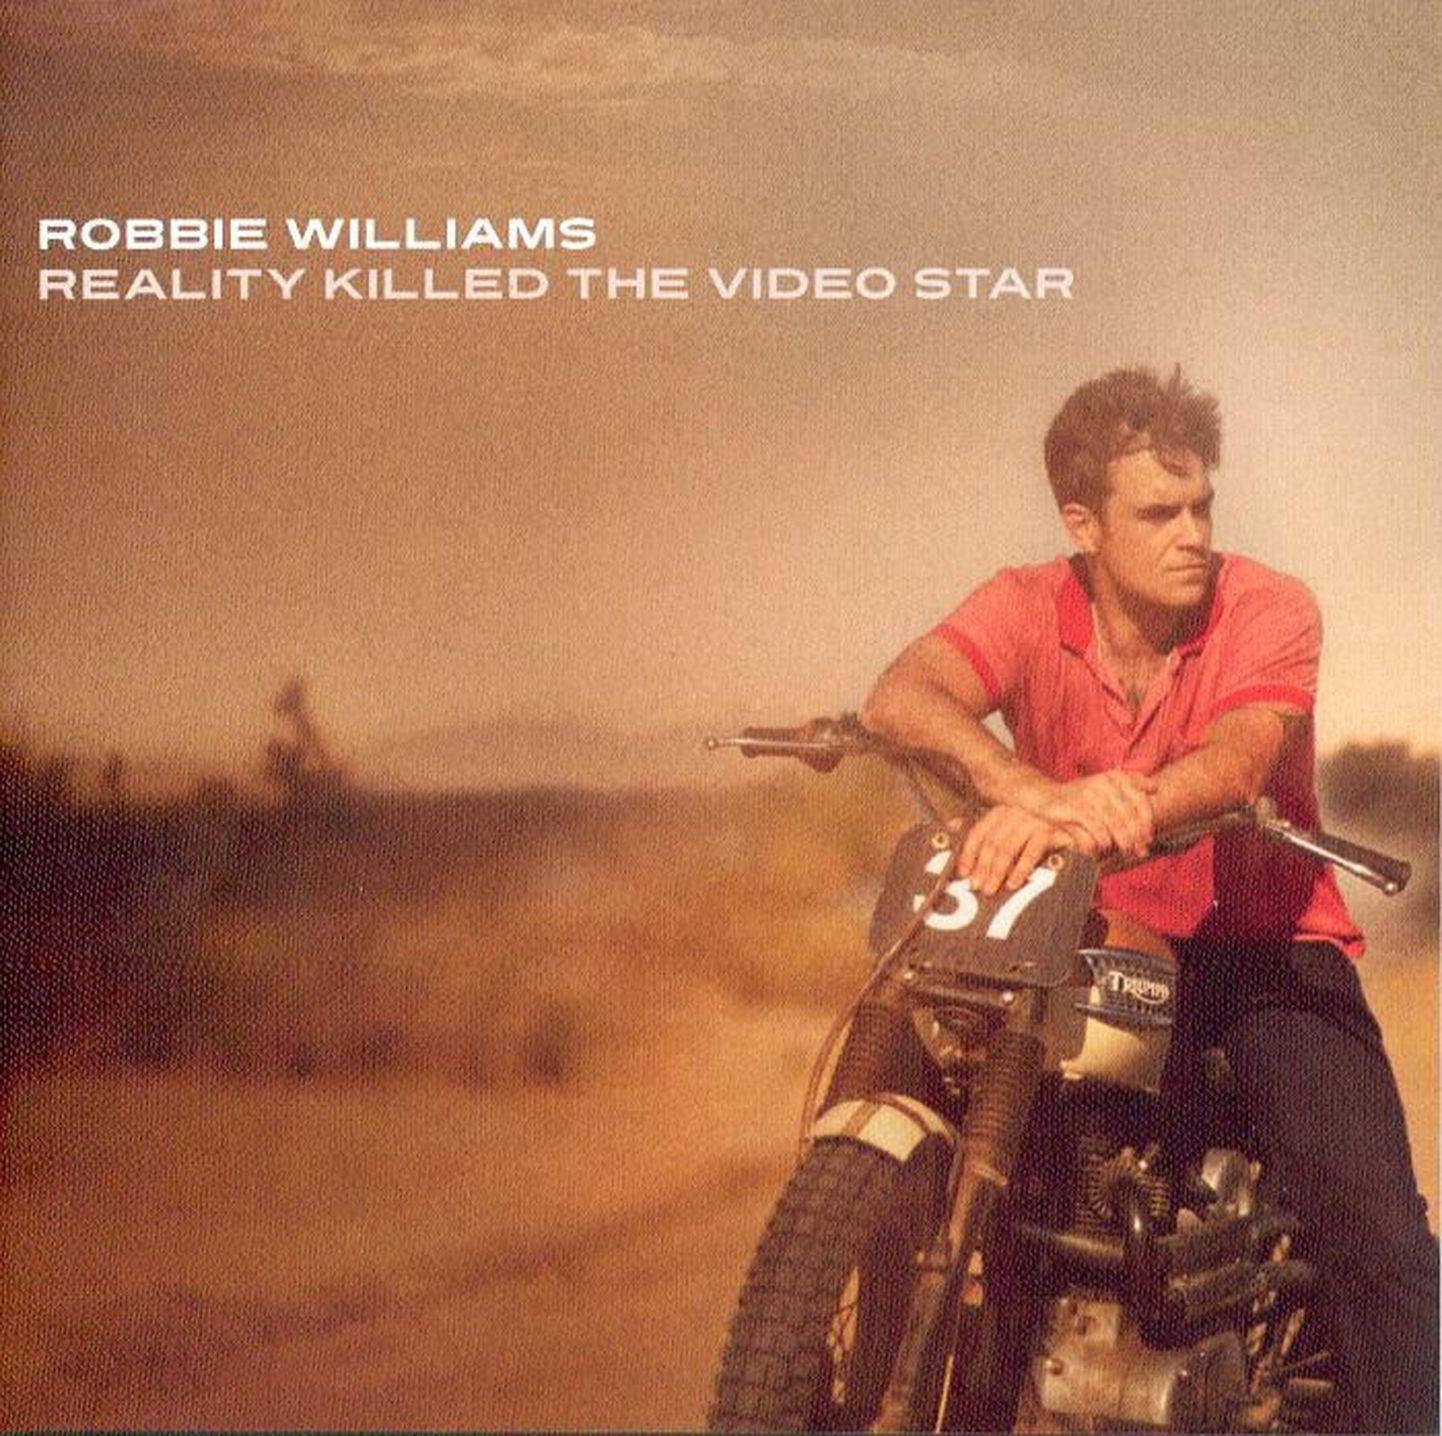 Robbie Williams “Reality Killed The Video Star”.